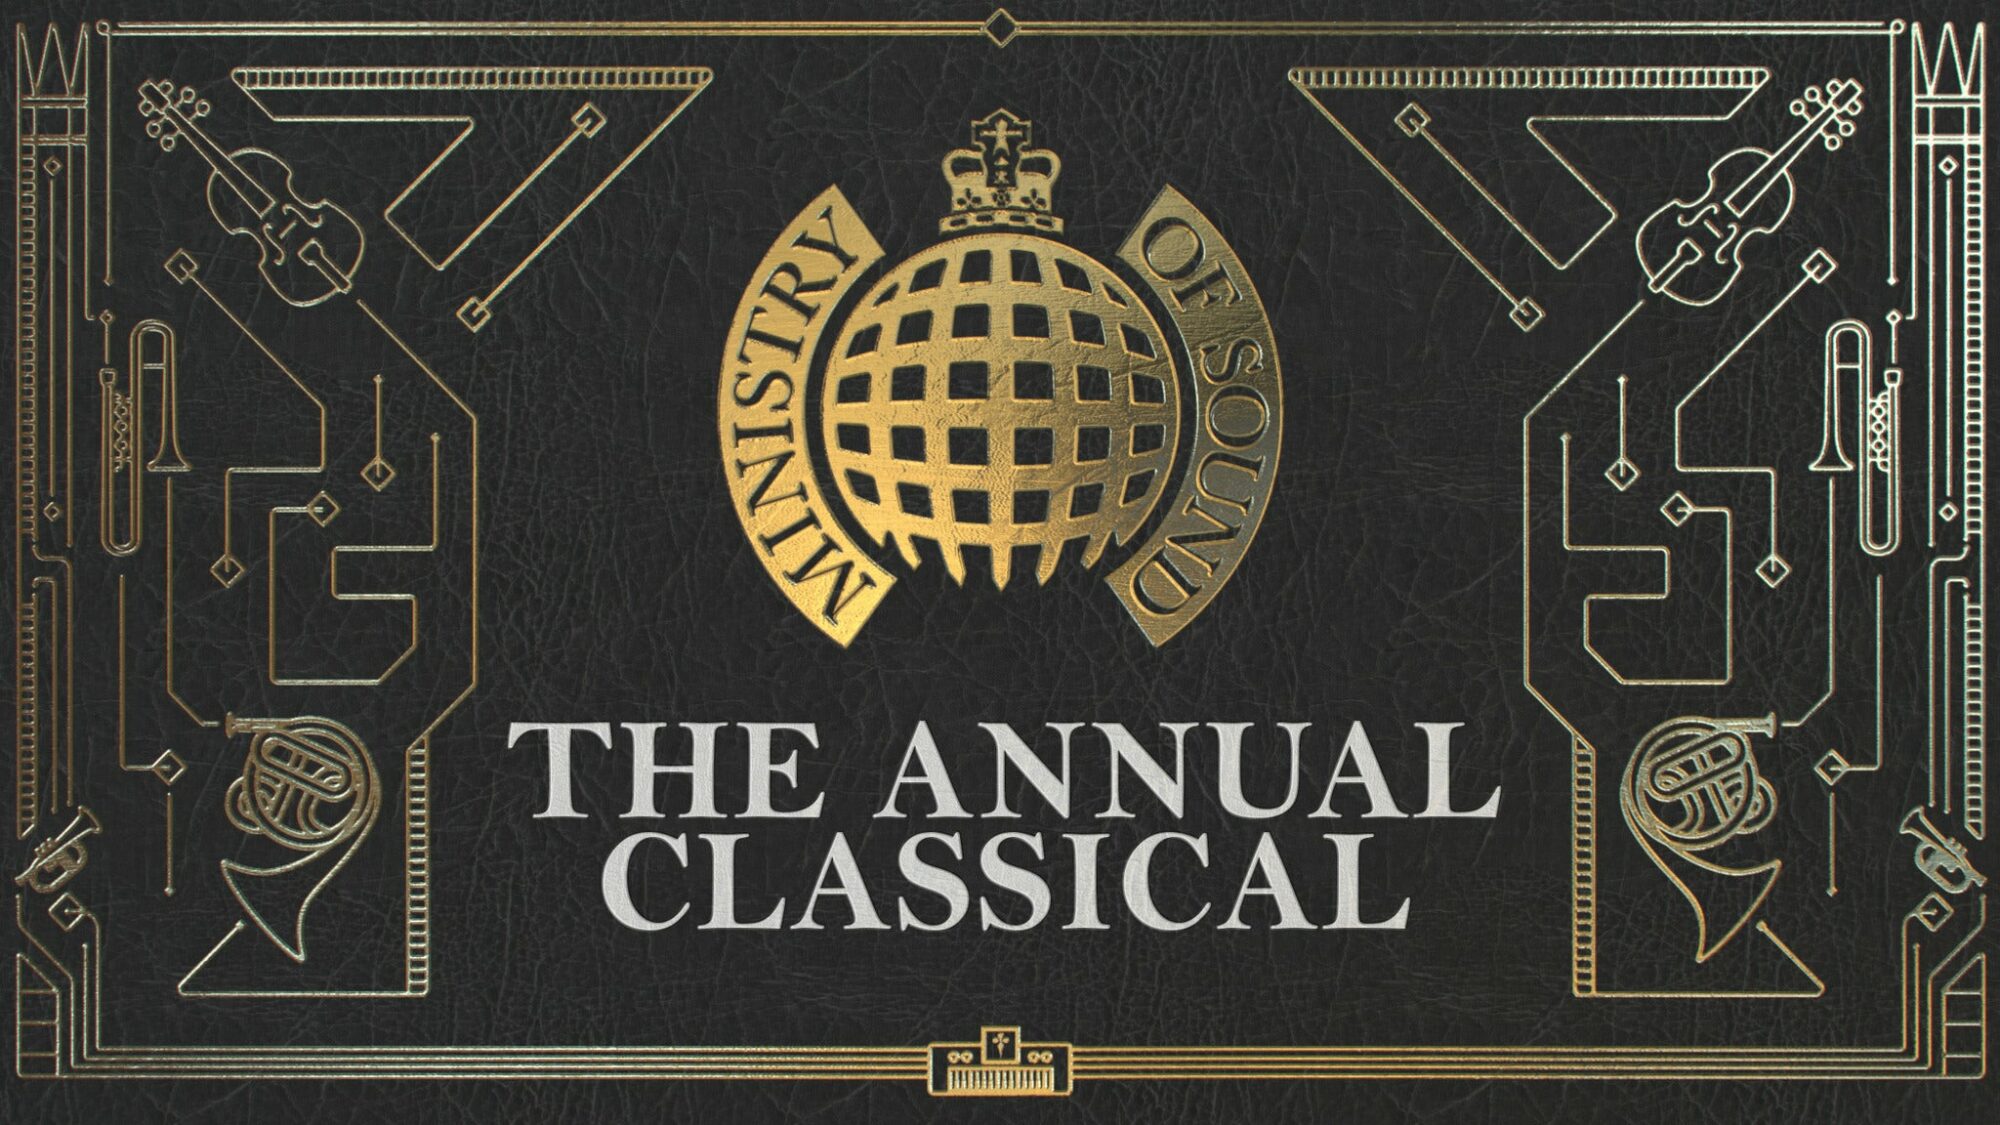 Image name Ministry of Sound Classical Ticket Hotel Packages at The Piece Hall the 9 image from the post Ministry of Sound Classical Ticket + Hotel Packages at The Piece Hall, Halifax in Yorkshire.com.